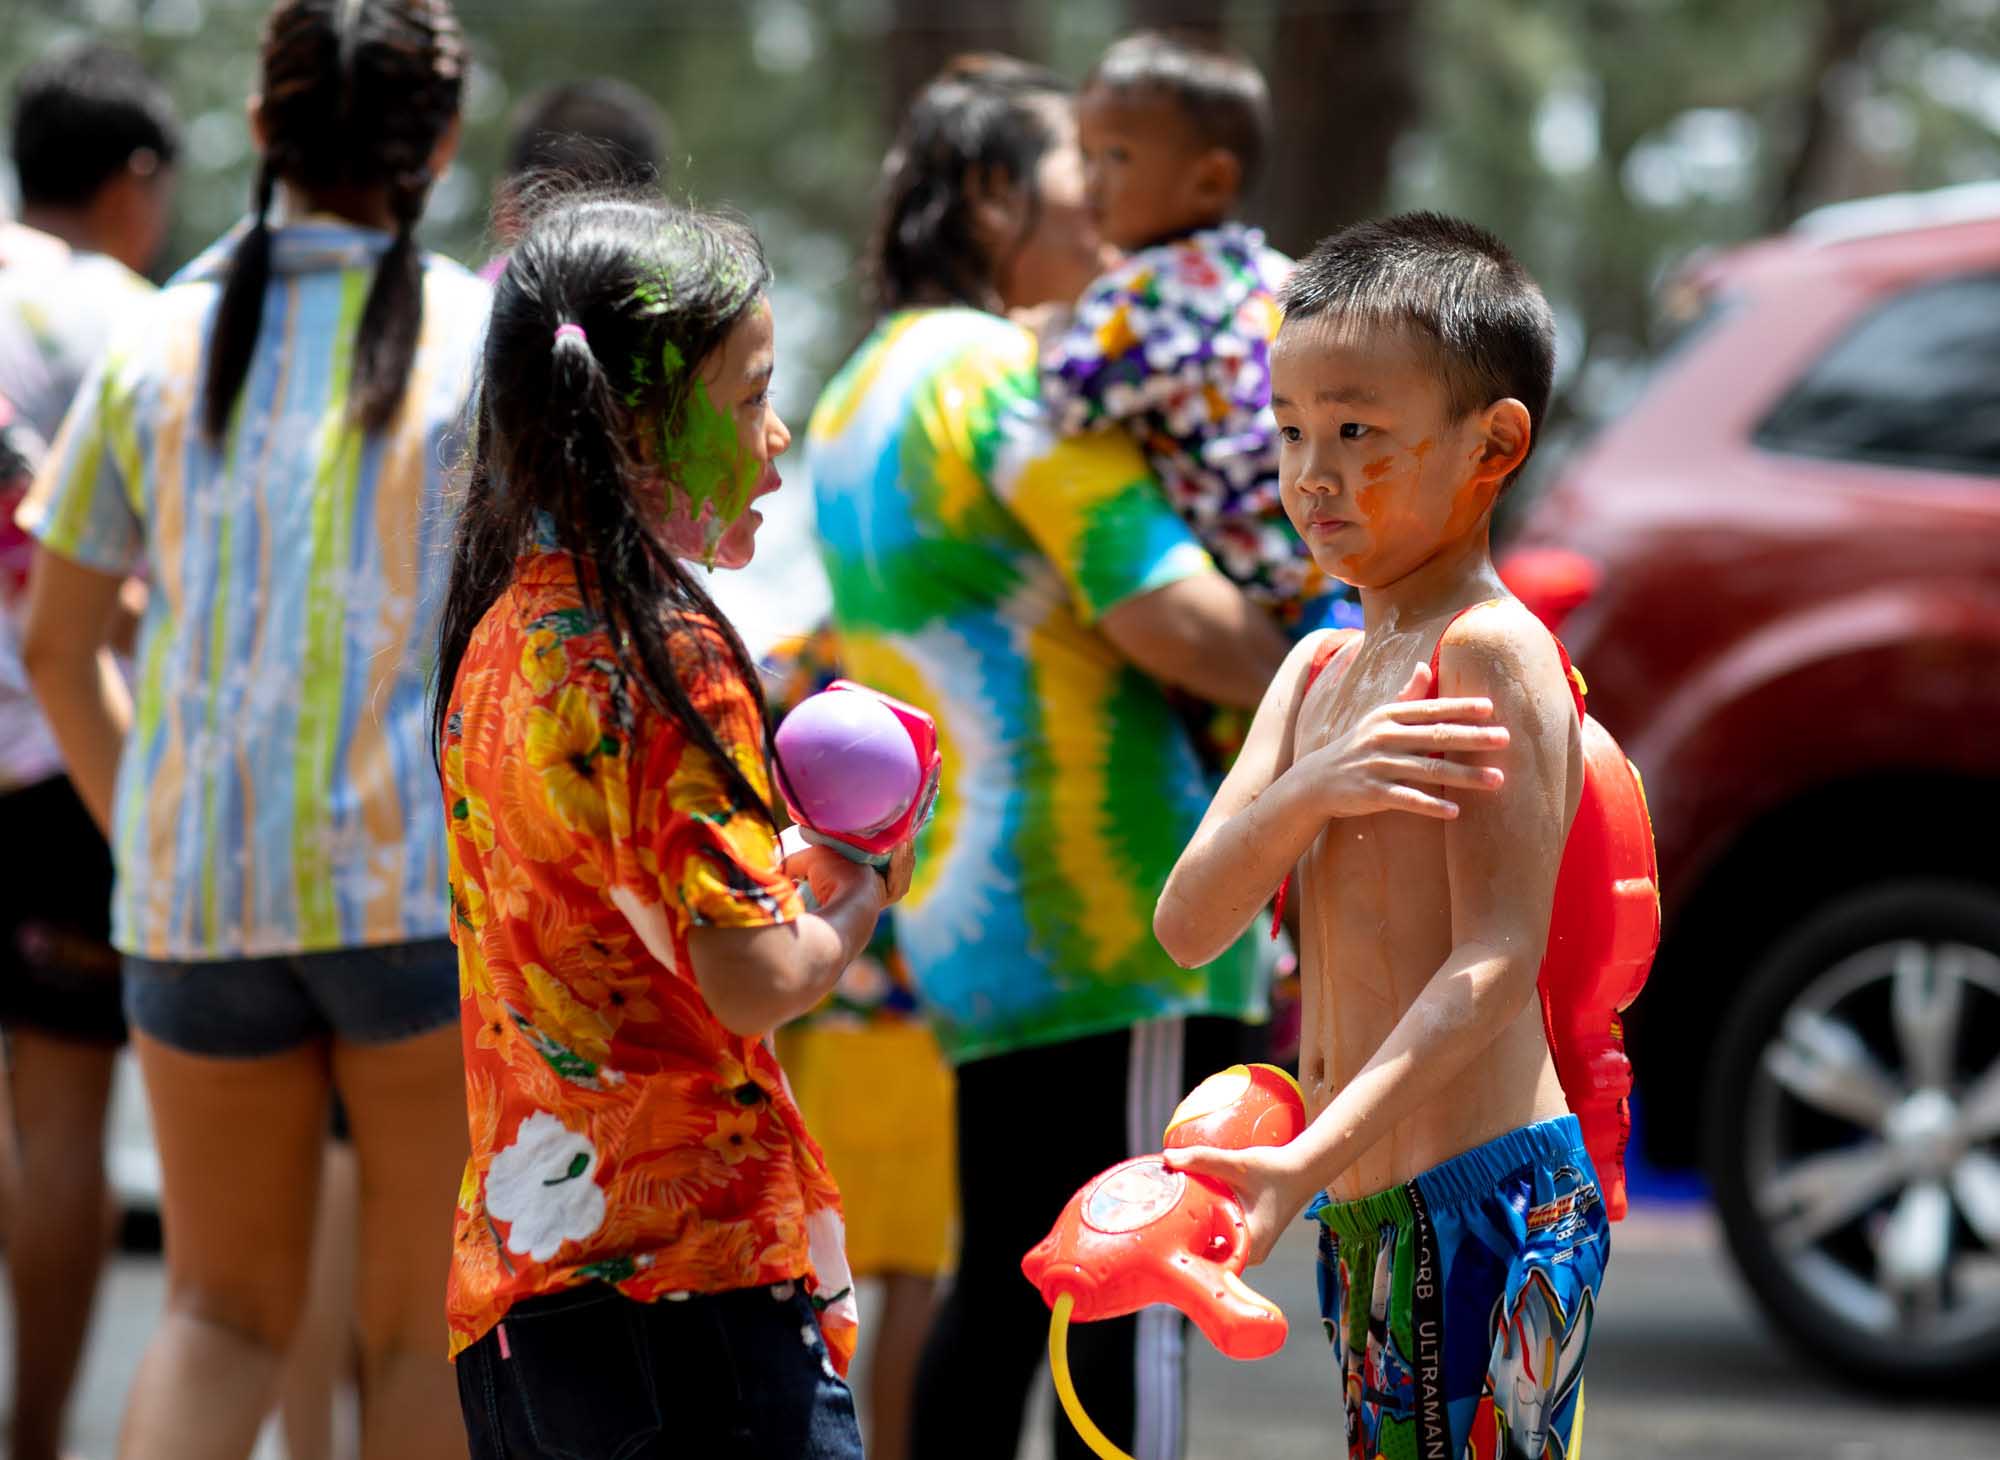 Two young kids with painted faces on Songkran water festival in Phuket, Thailand